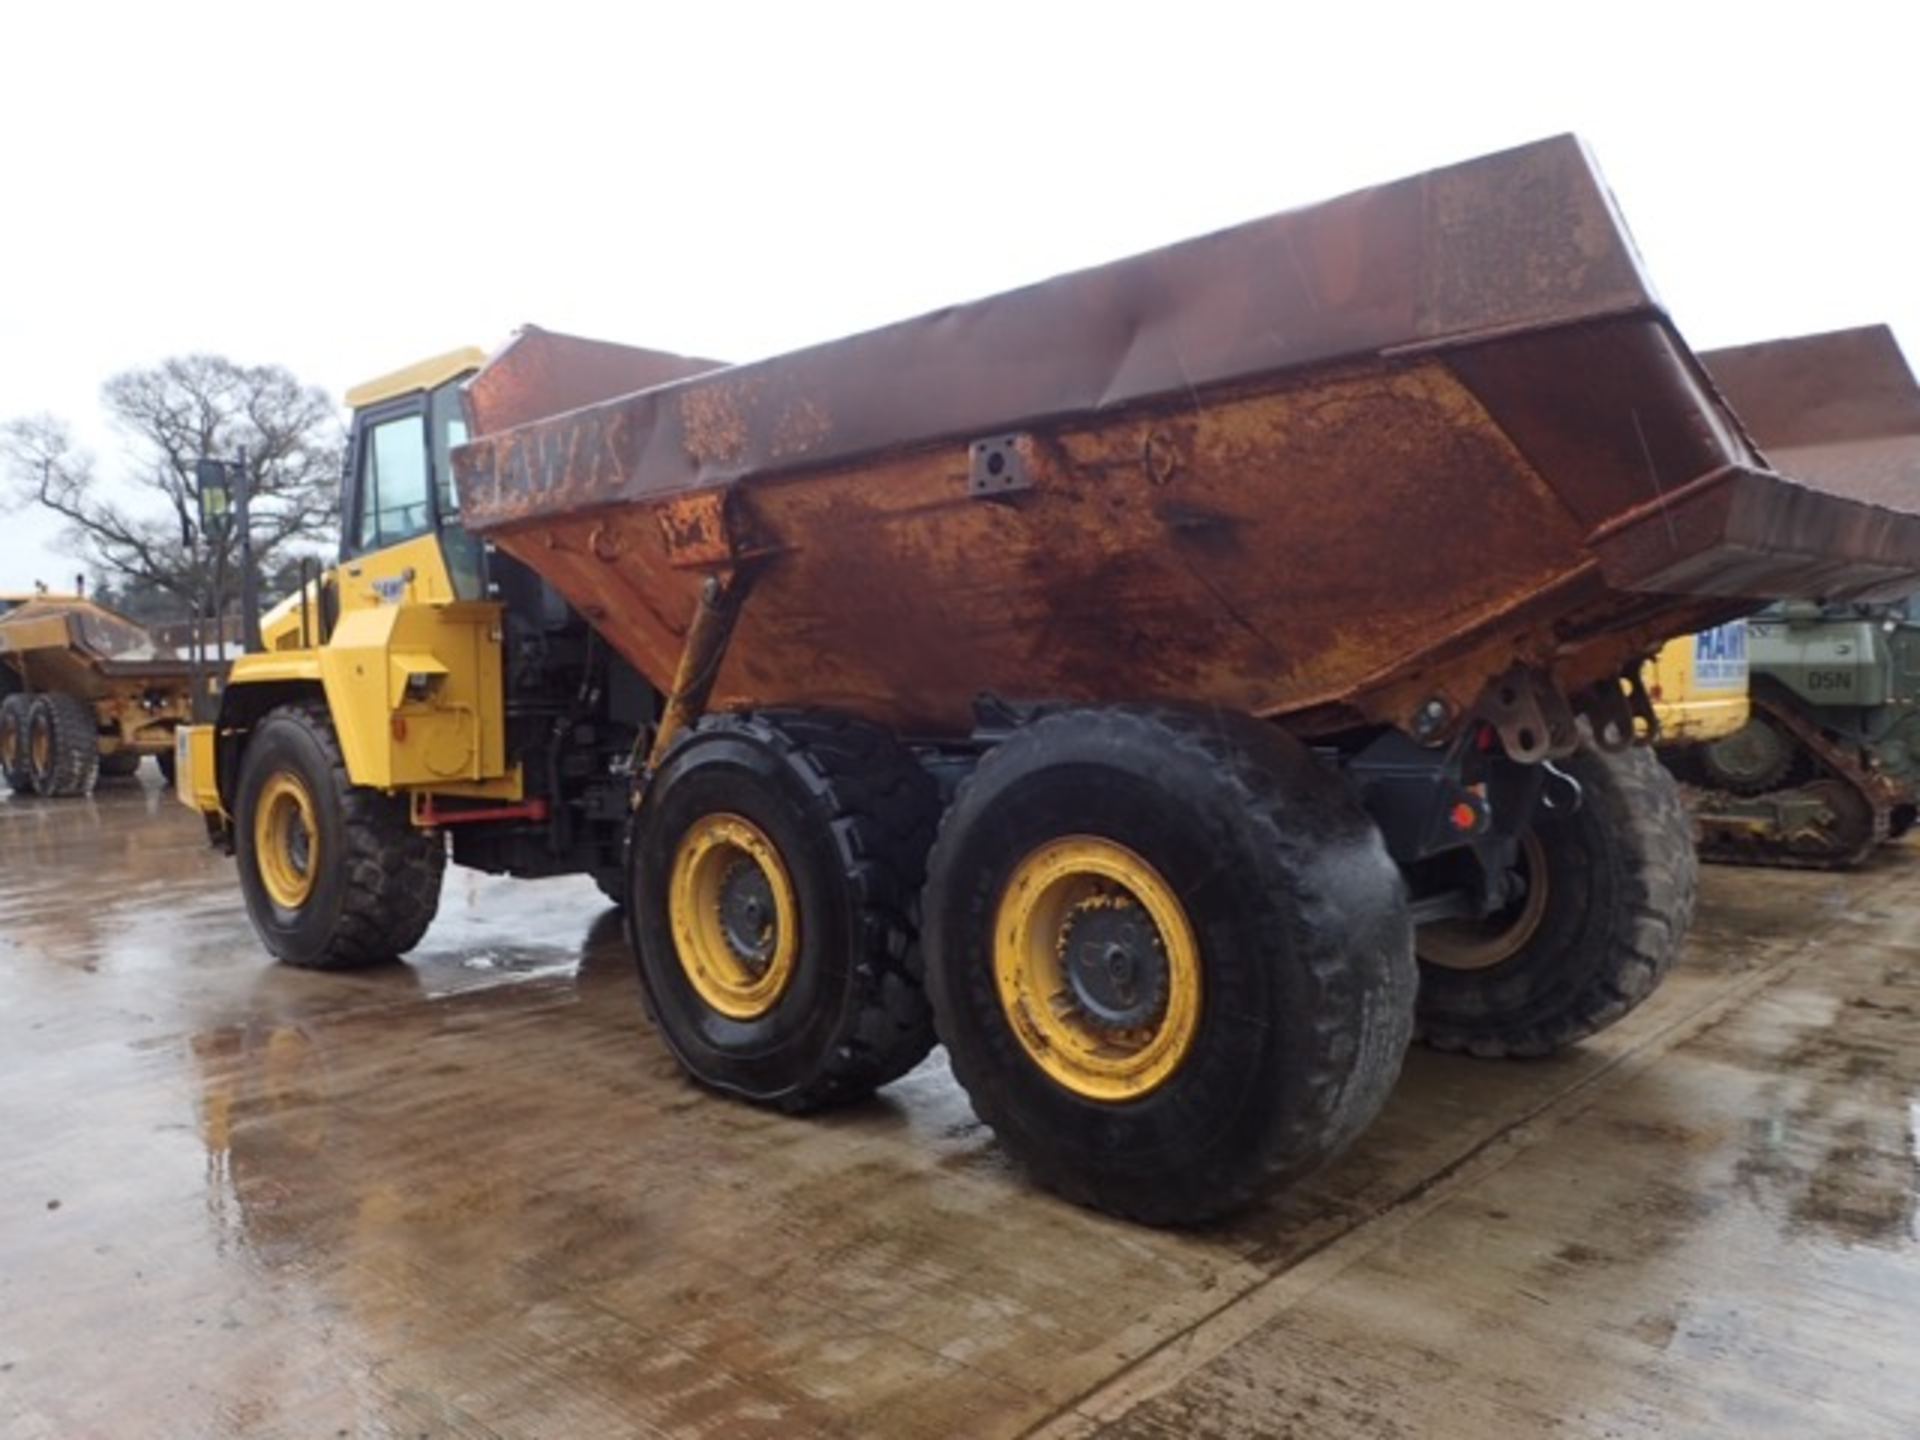 Komatsu HM300-1 30 tonne 6 x 6 wheel articulated dump truck Year: 2005 S/N: 1383 Recorded Hours: - Image 3 of 16